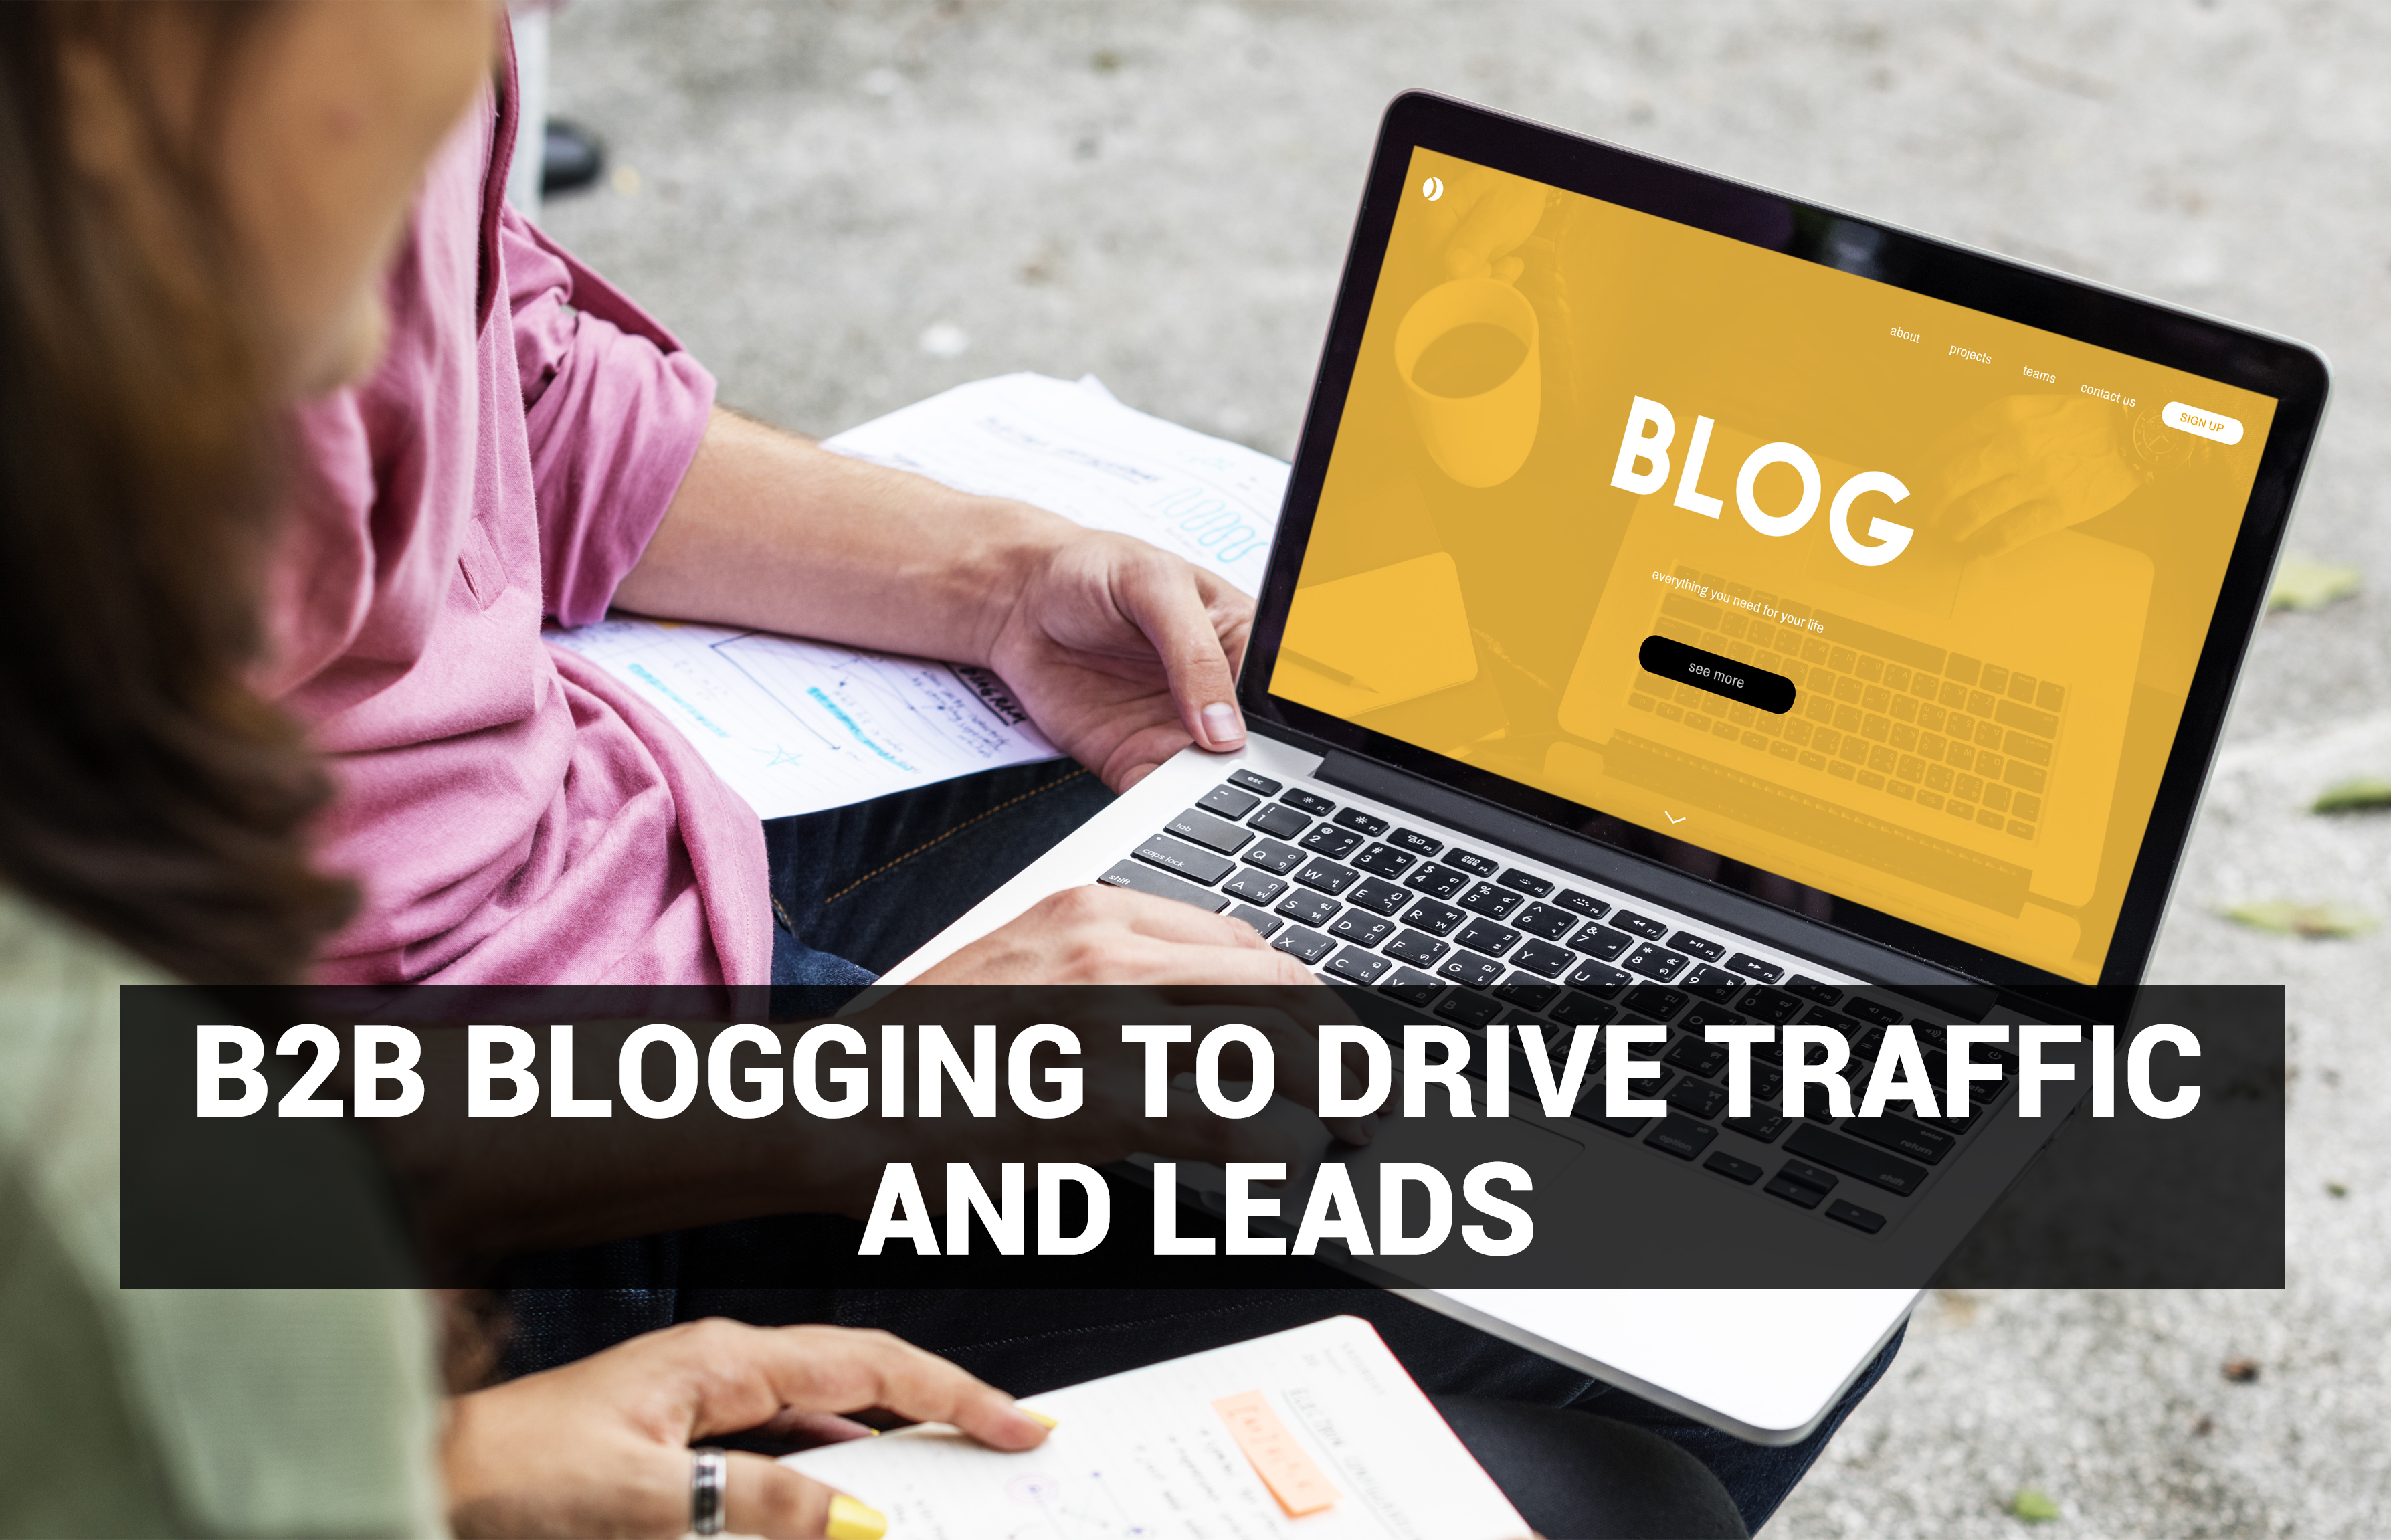 B2B Blogging To Drive Traffic and Leads